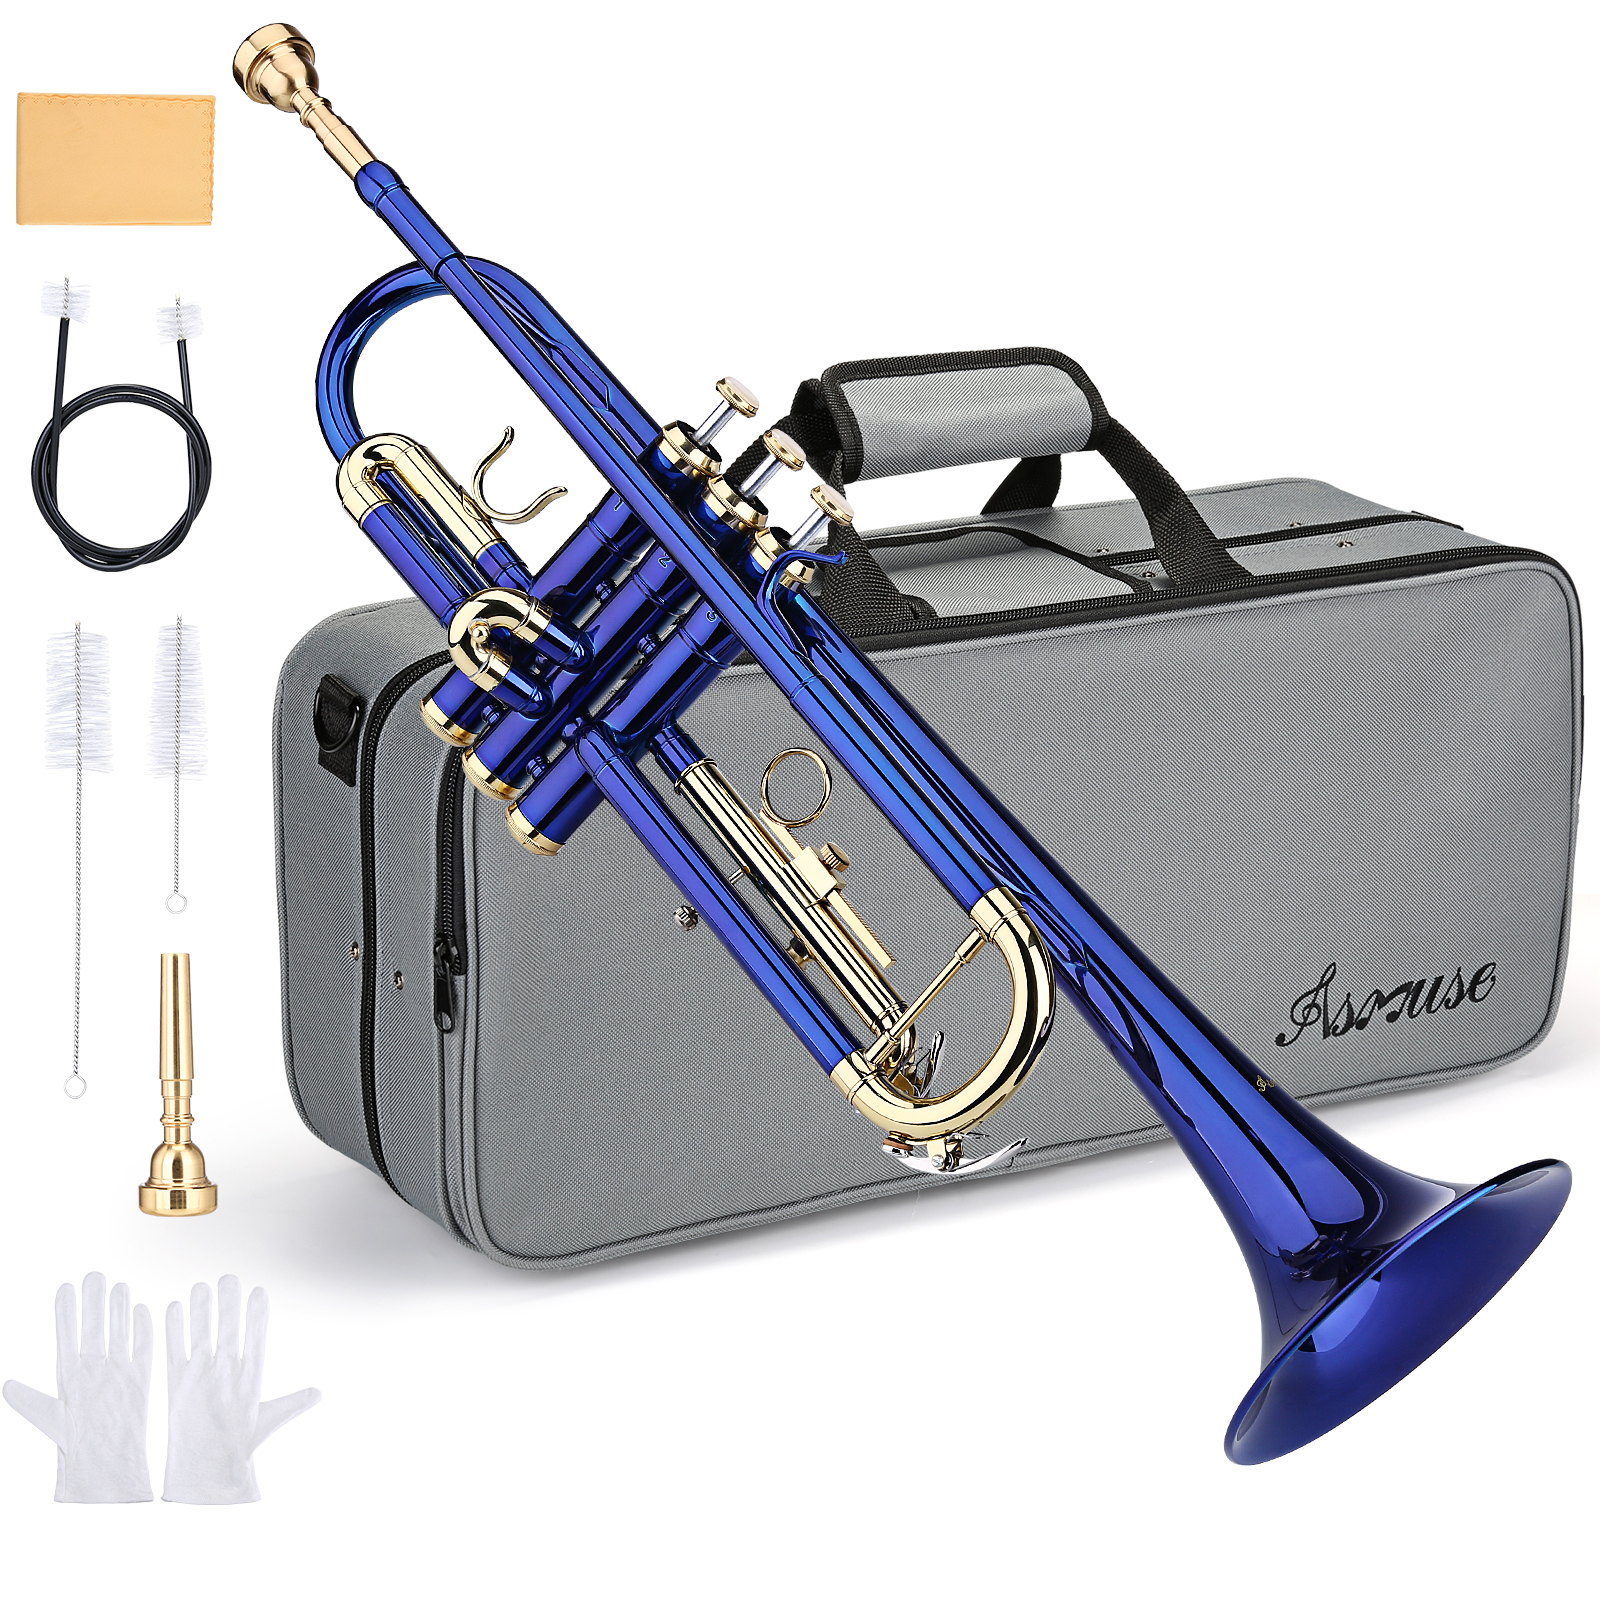 Color:Blue:BB TRUMPET- STUDENT BAND TRUMPETS BRASS INSTRUMENT WITH HARD CASE FOR BEGINNER